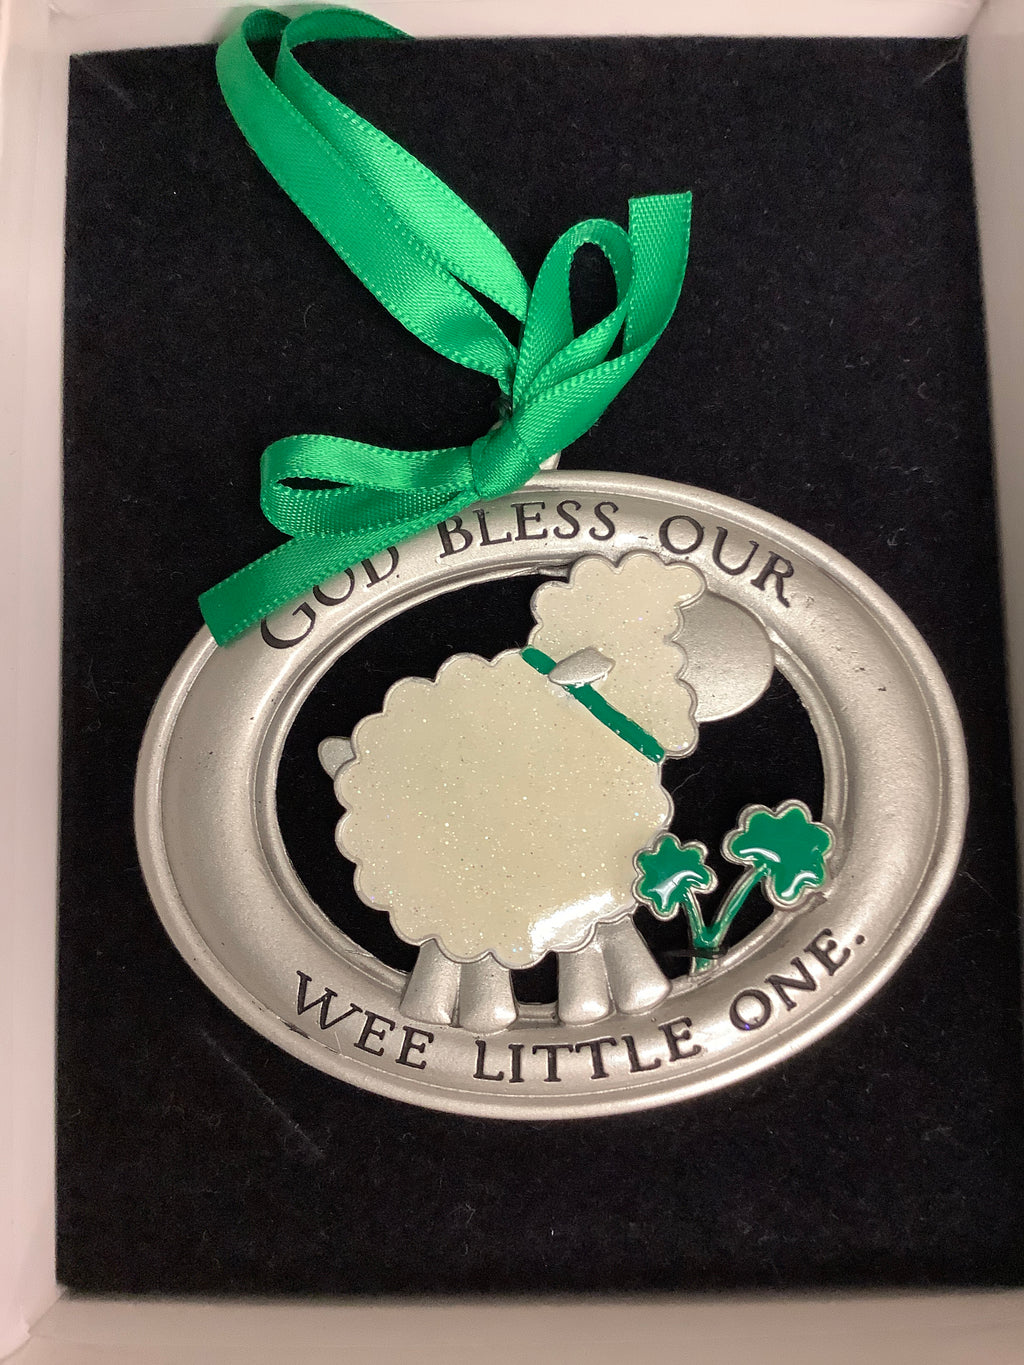 God Bless Our Wee Little One Crib Medal